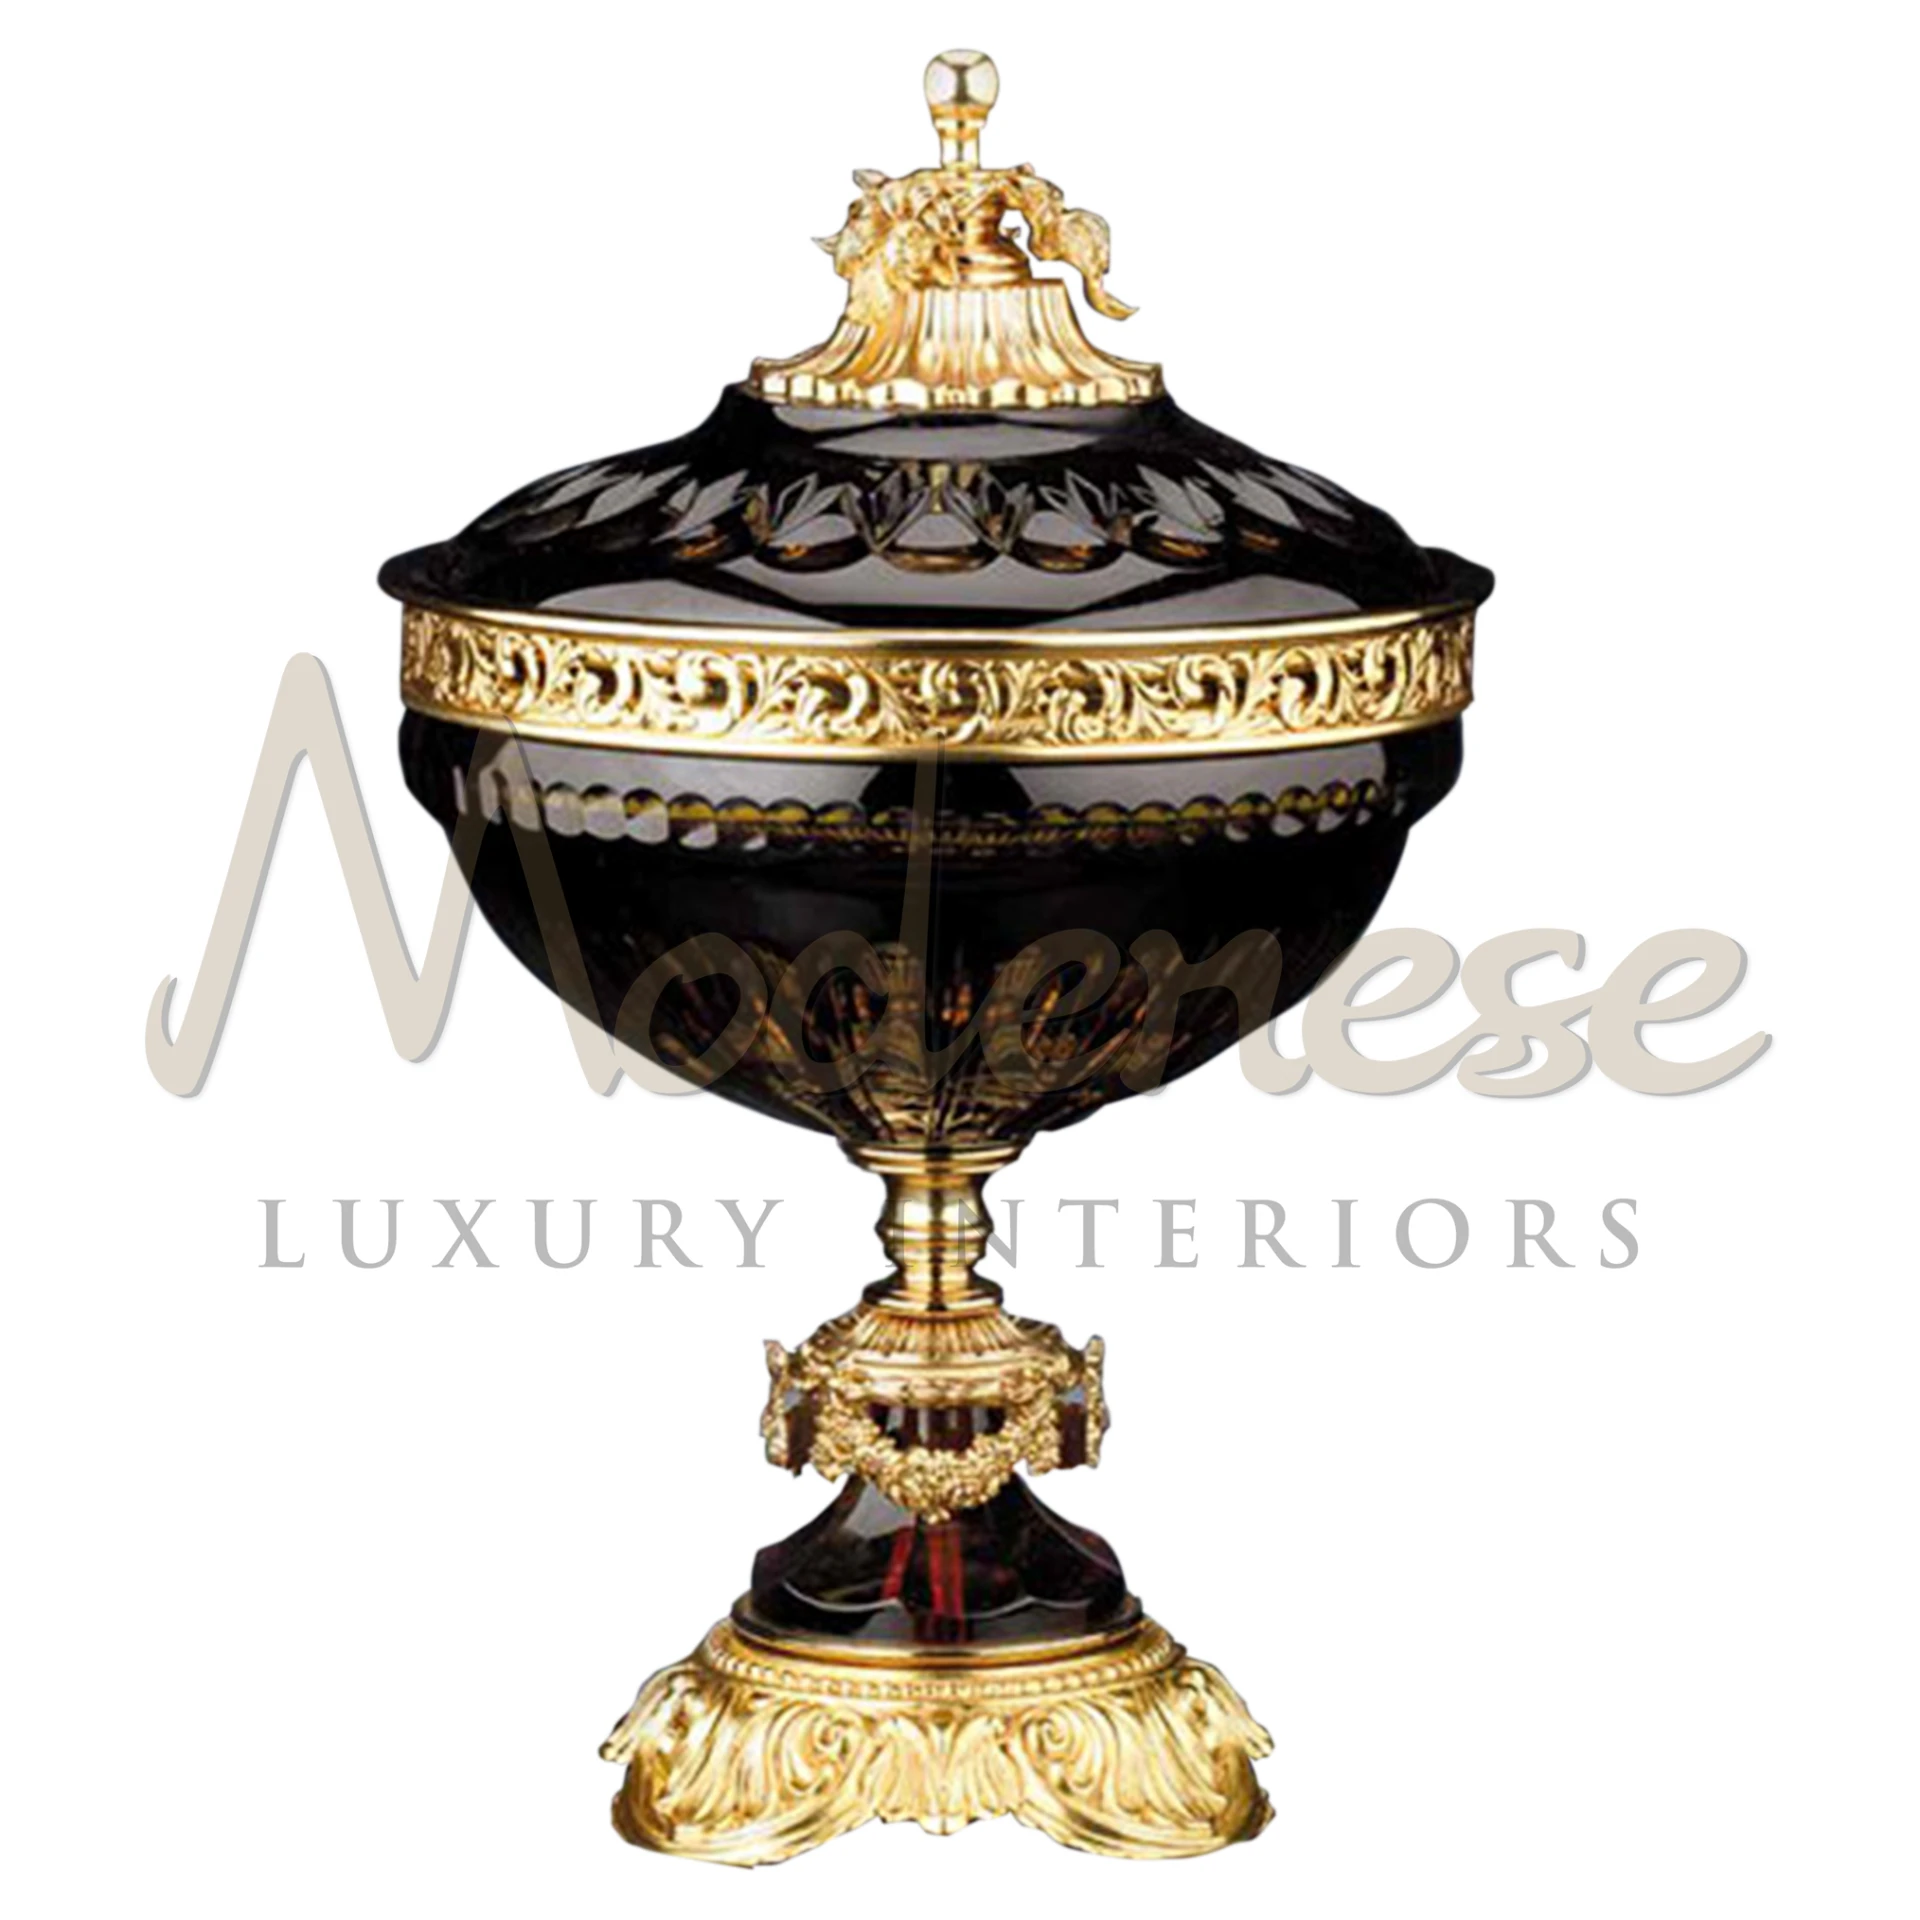 Victorian Dark Glass Vase by Modenese, capturing the sophistication and elegance of the Victorian era.